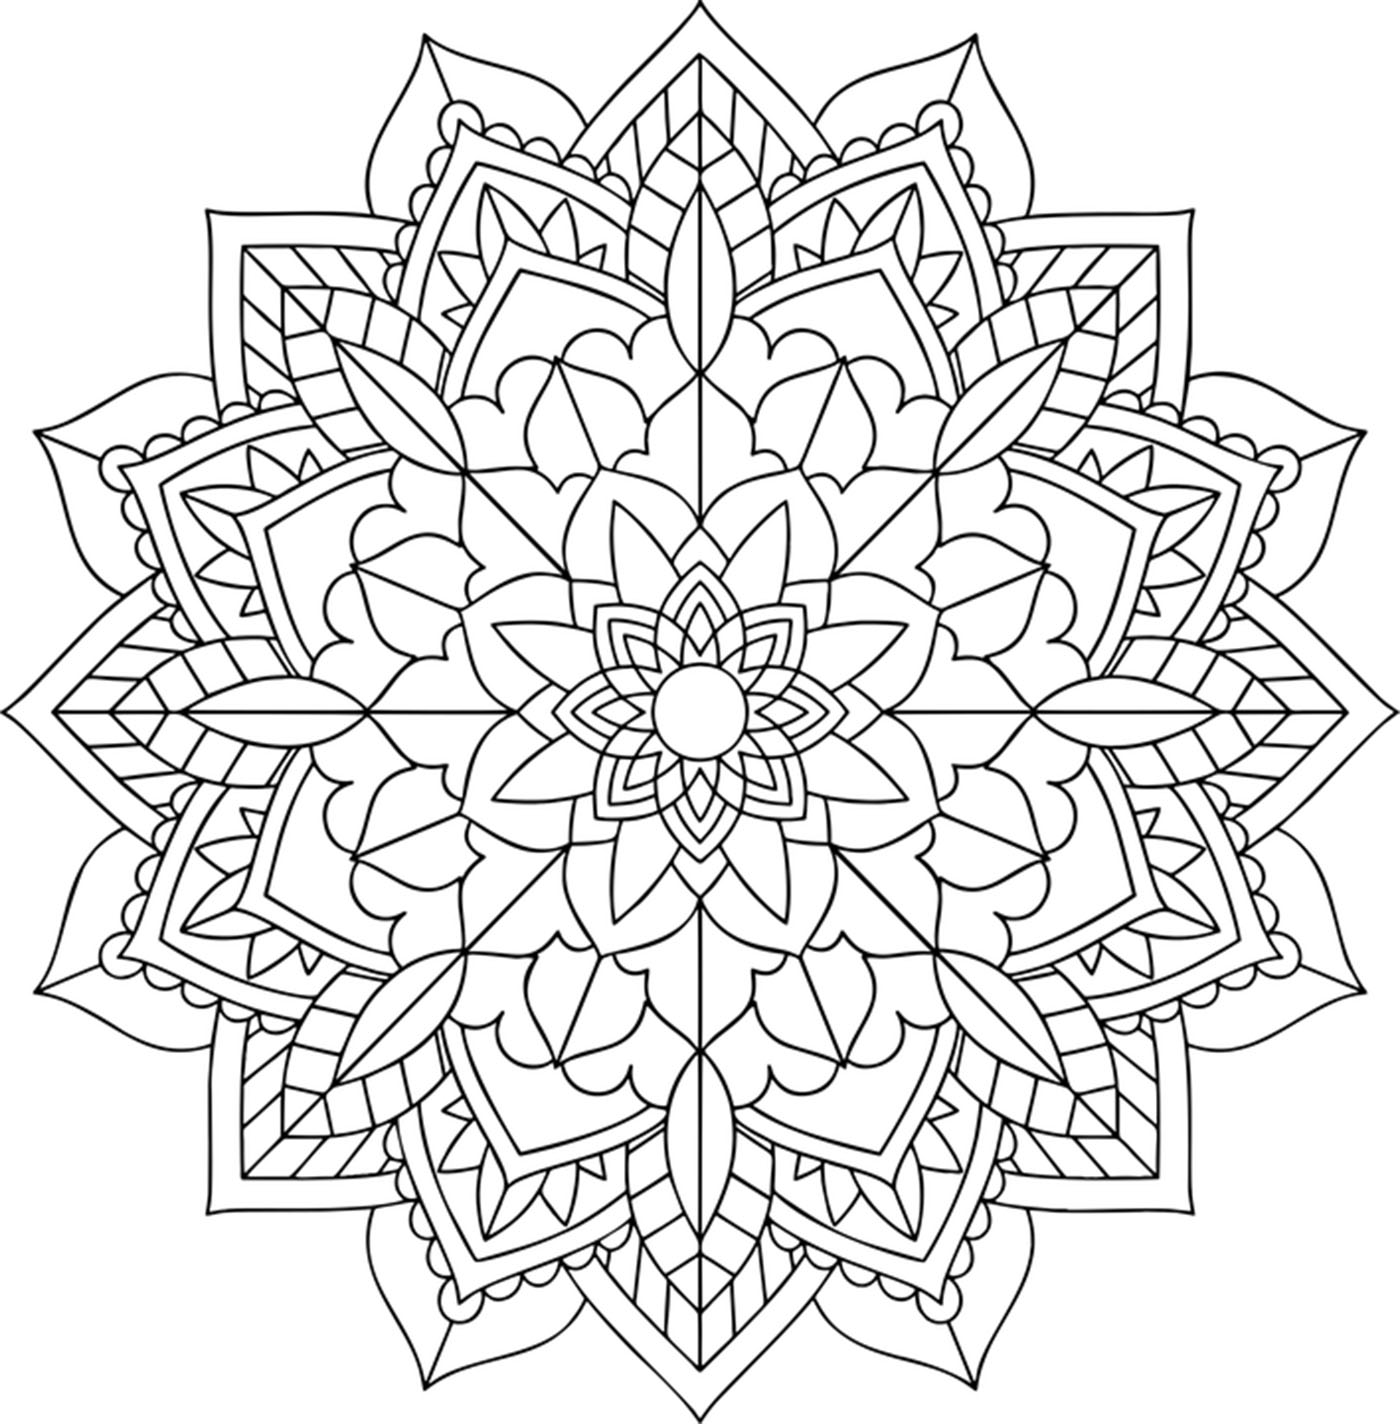 If you like to express your creativity, this Mandala is perfect for you.